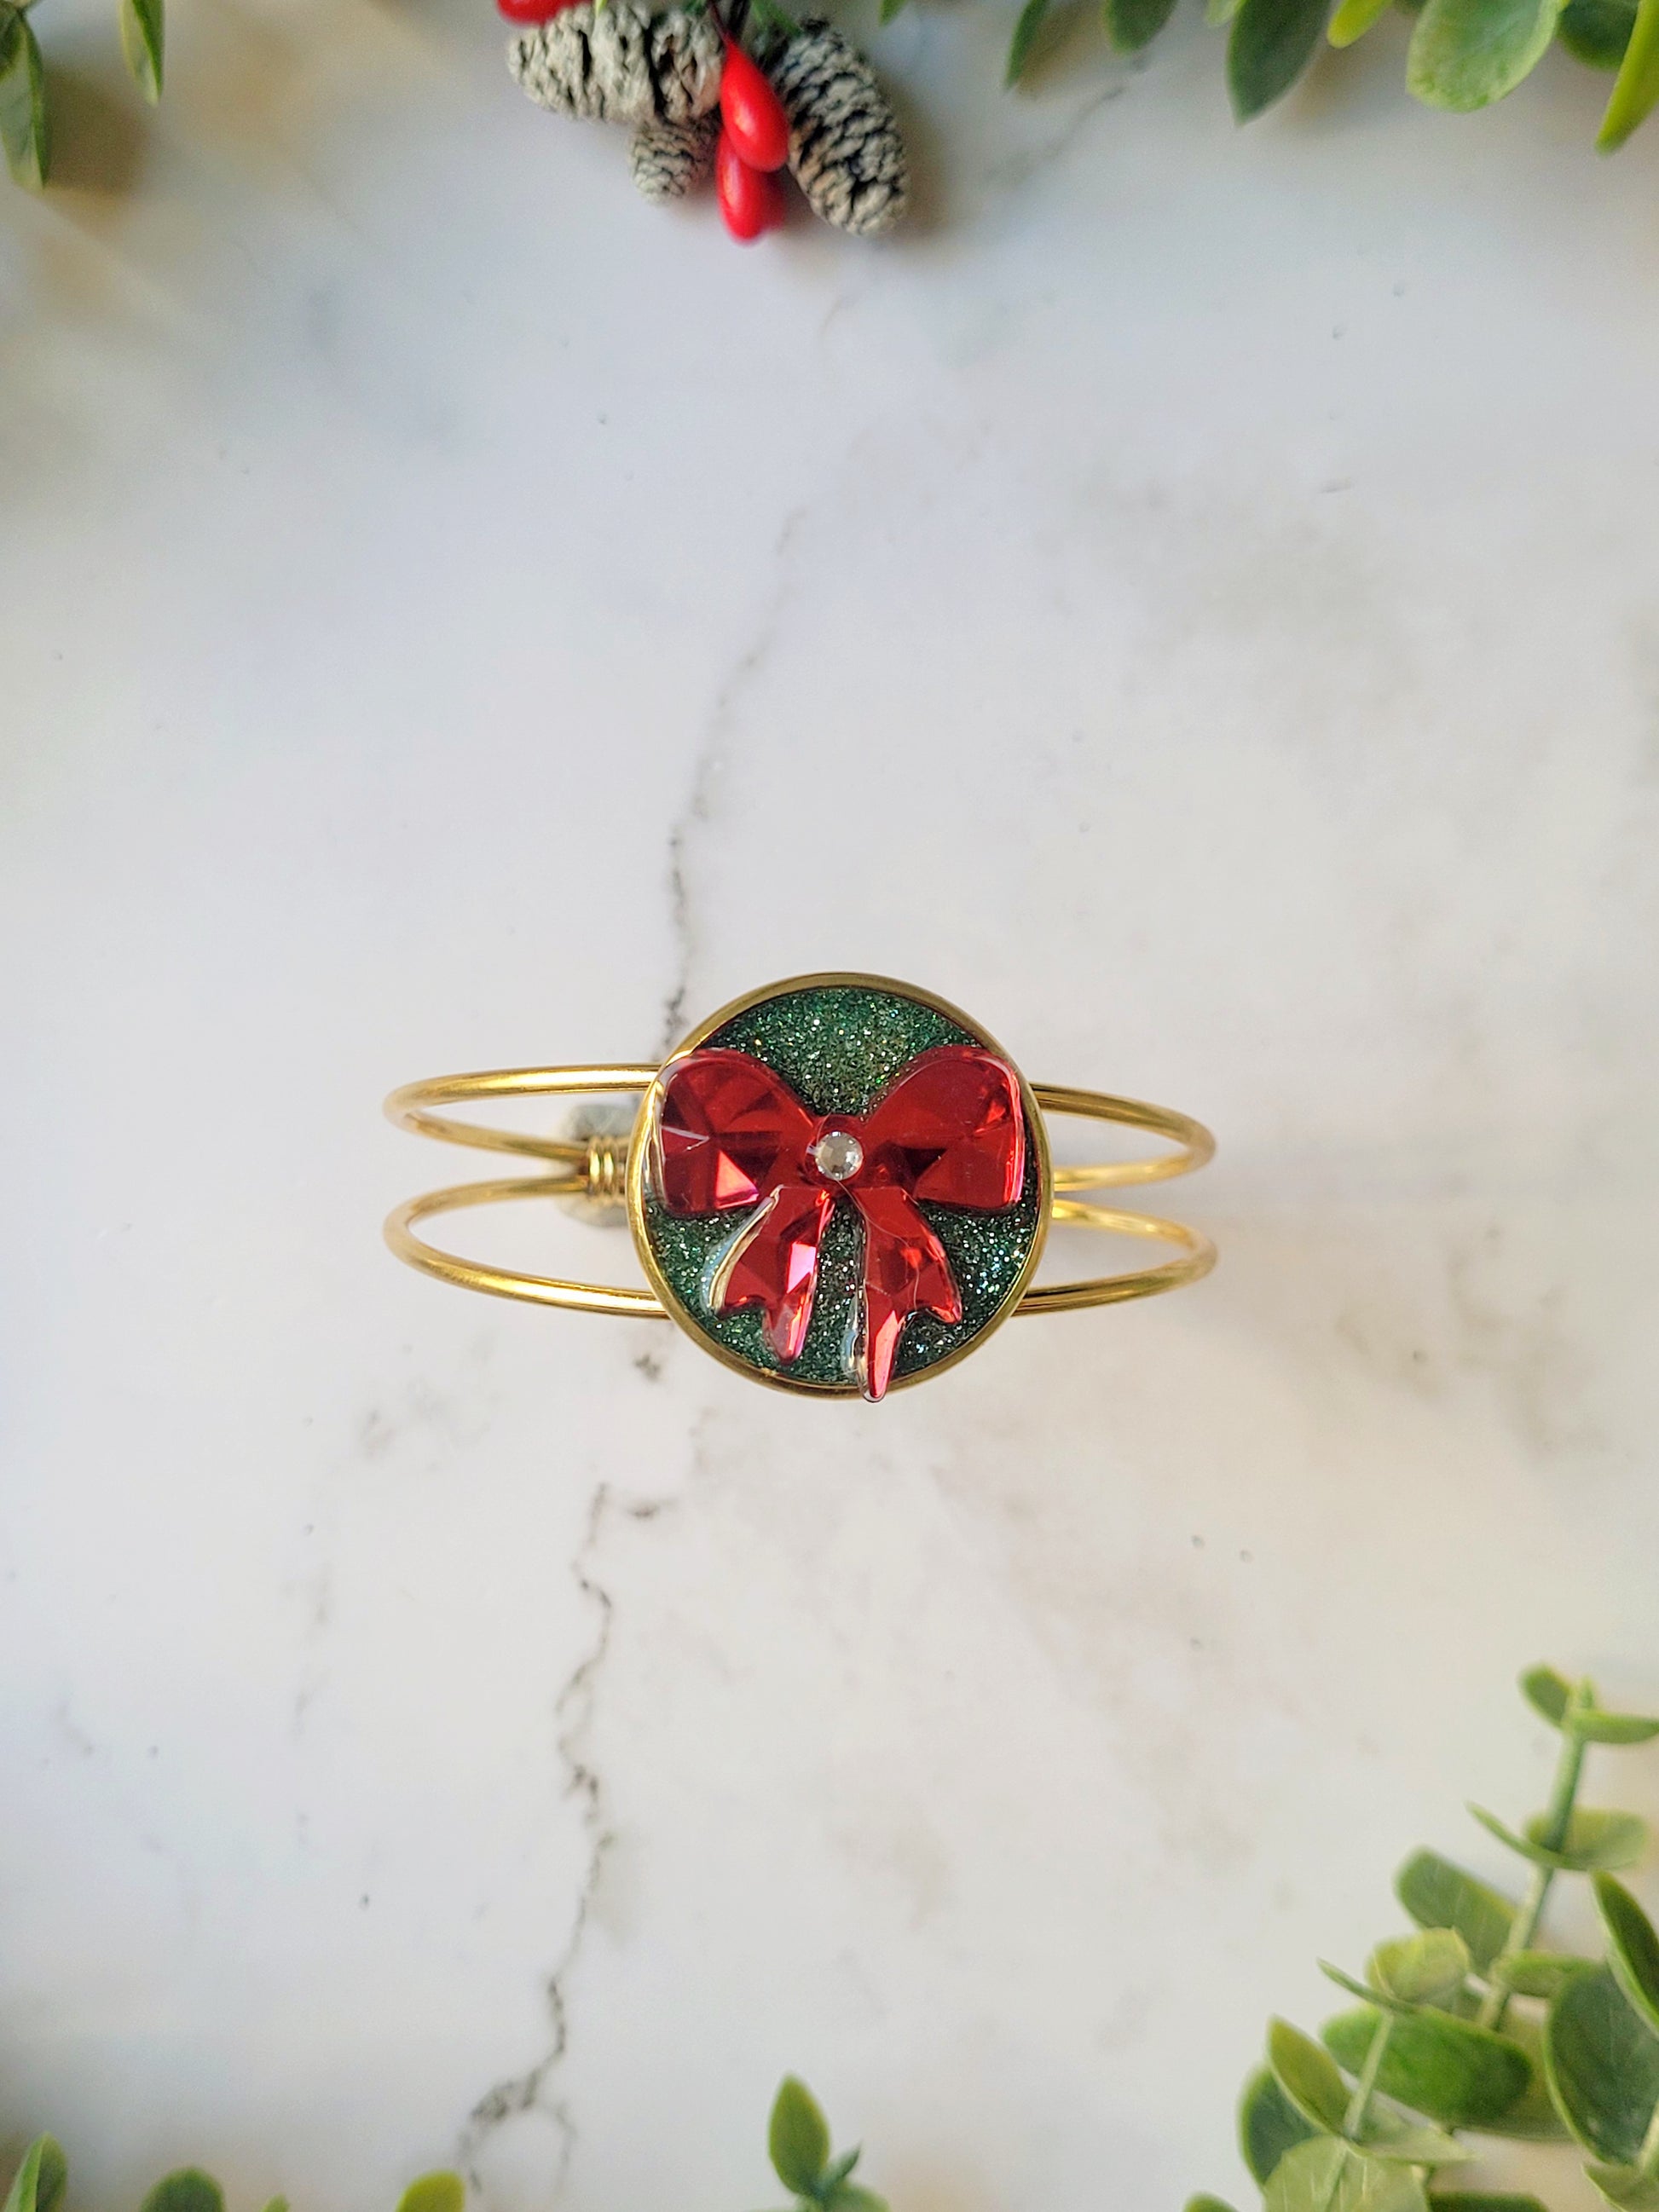 close up of green and red bow bracelet on a marble background surrounded by foliage.